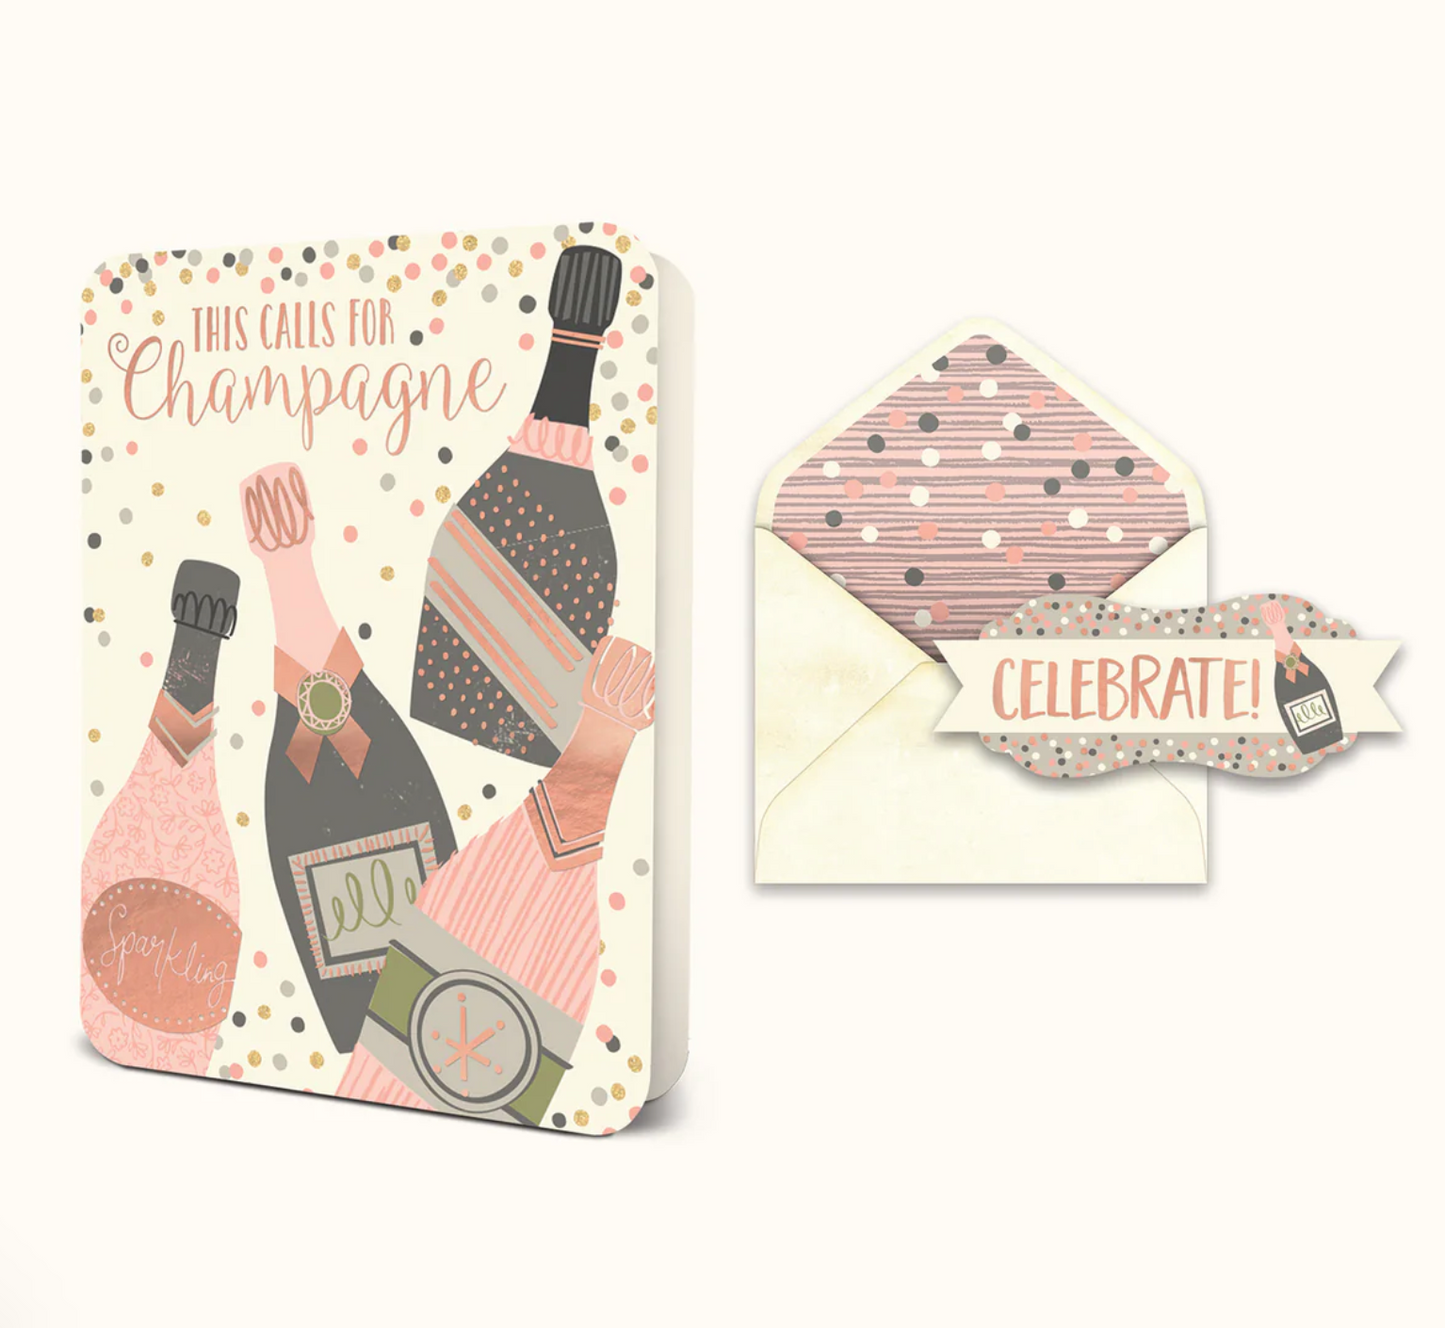 This Calls For Champagne Greeting Card